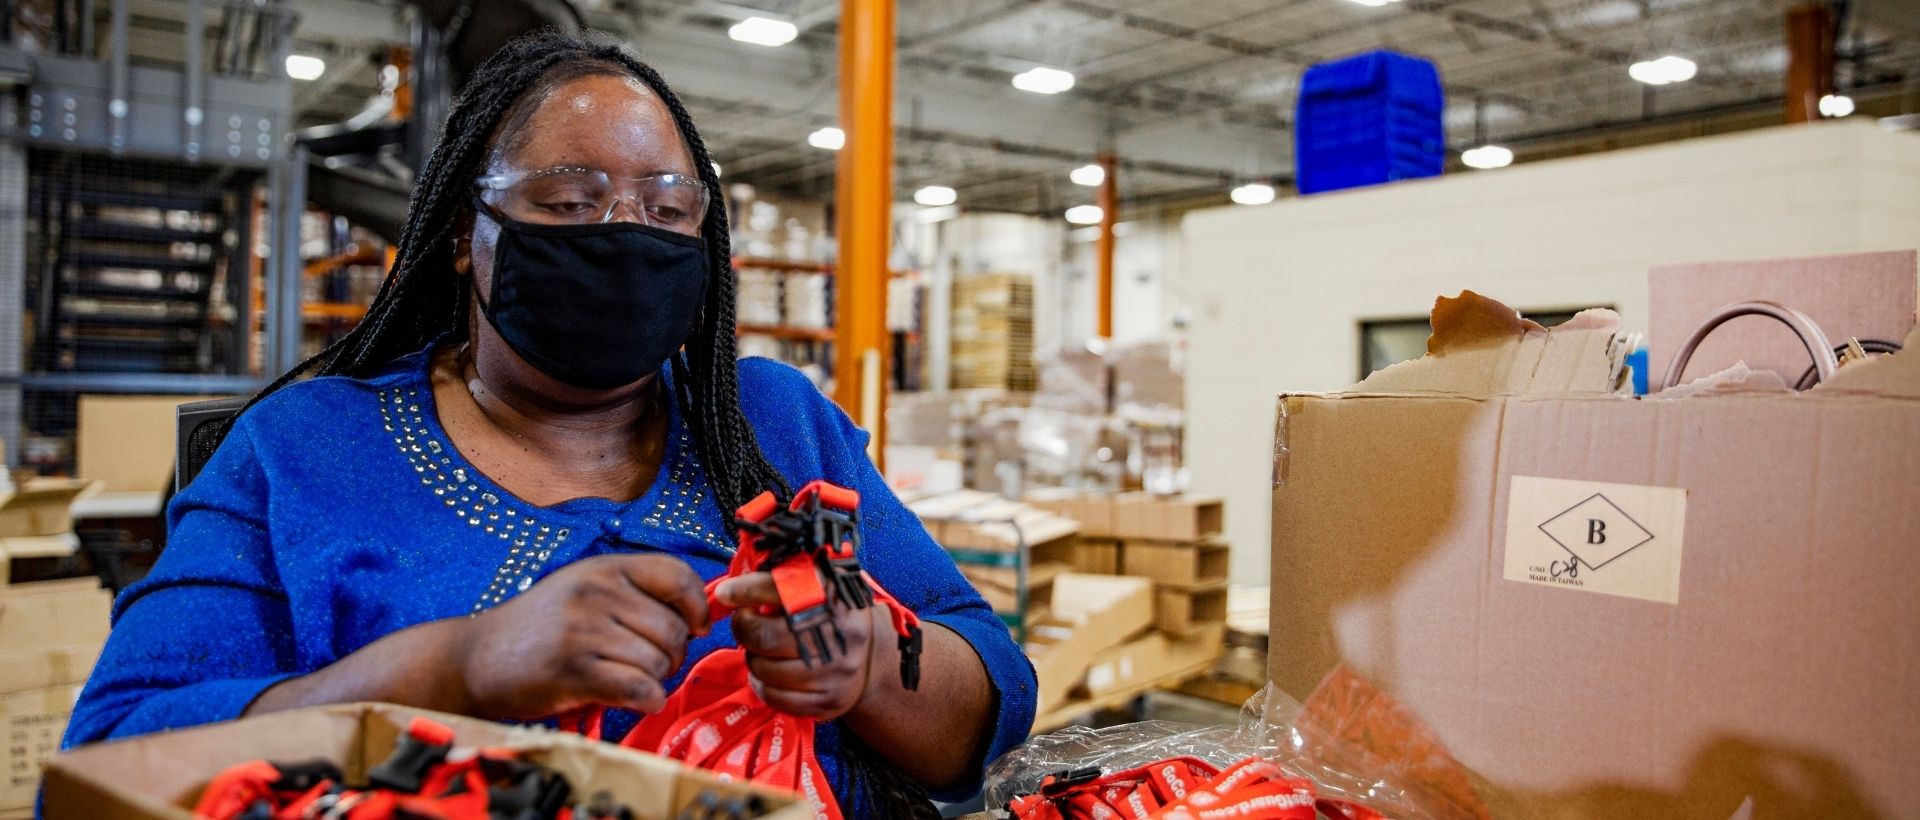 woman packaging items in a warehouse